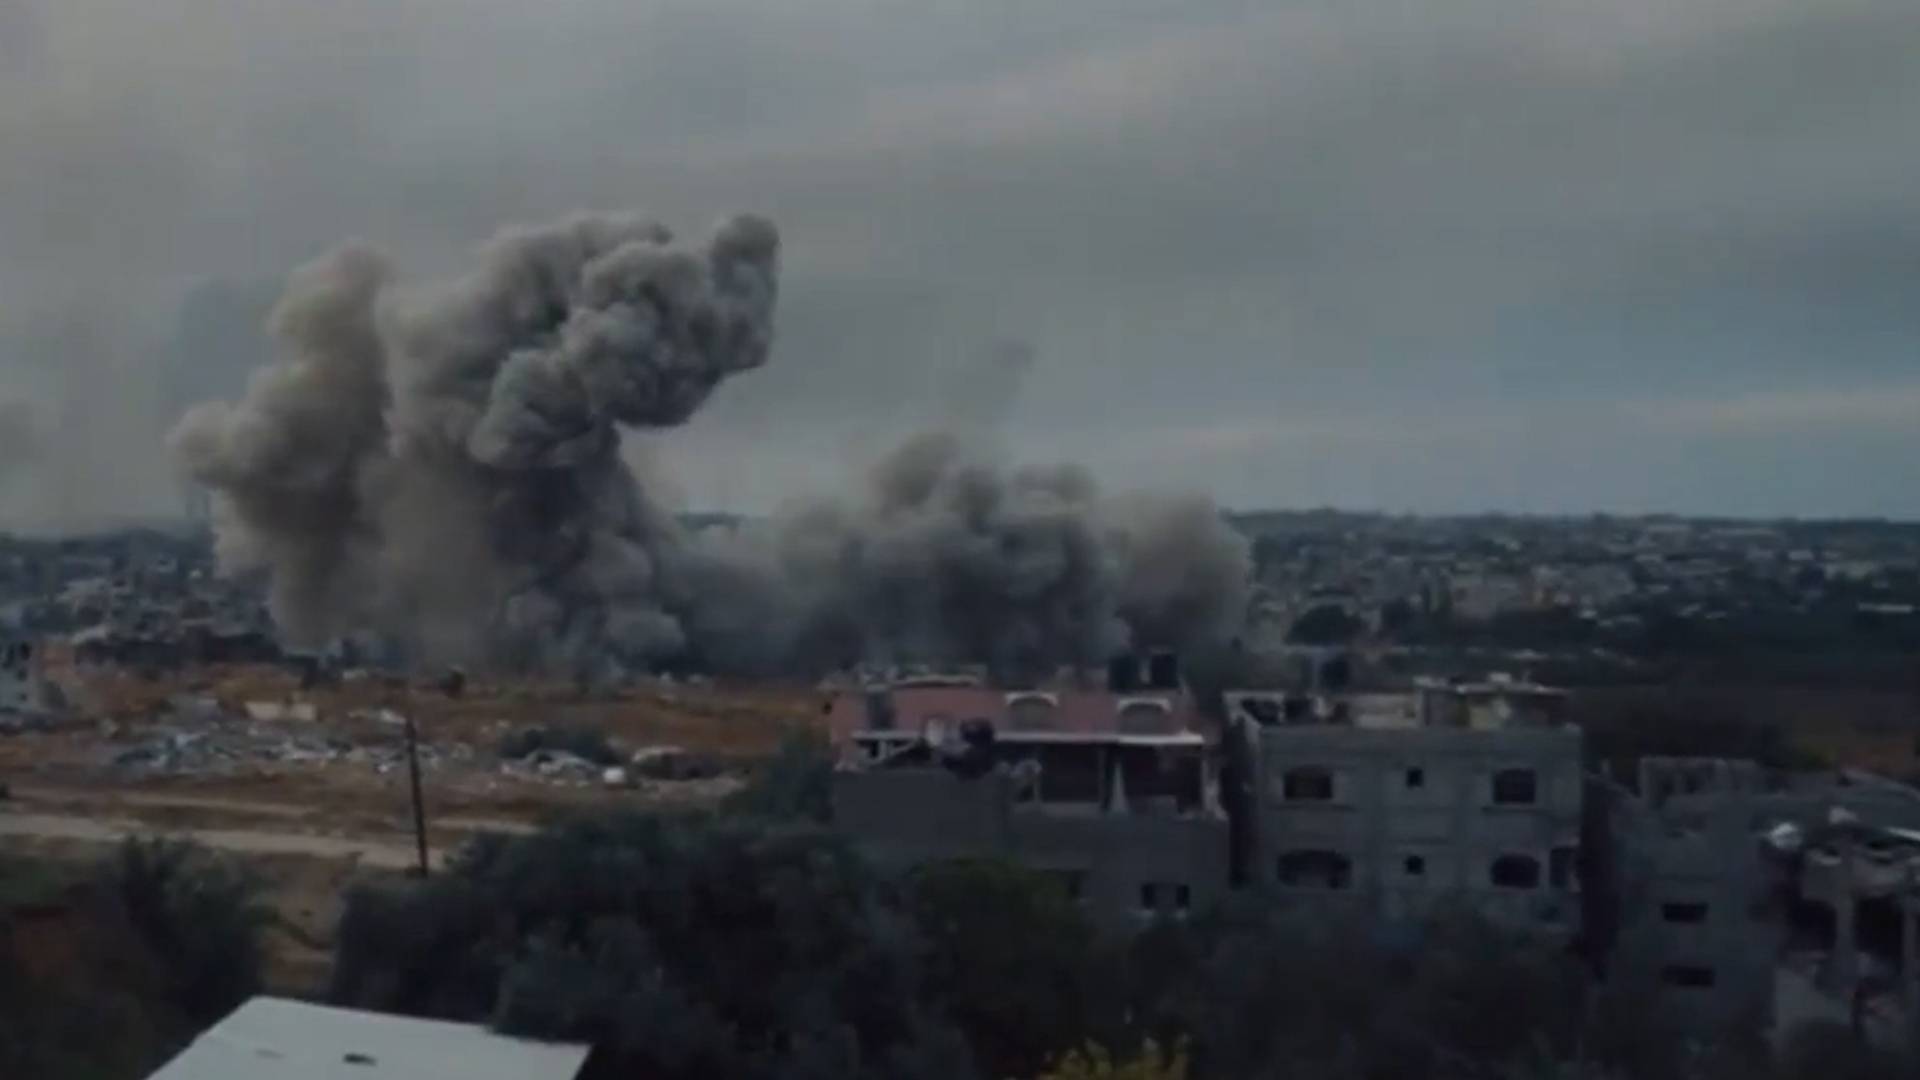 Israeli soldiers record their targeting of a school and residential buildings in Gaza